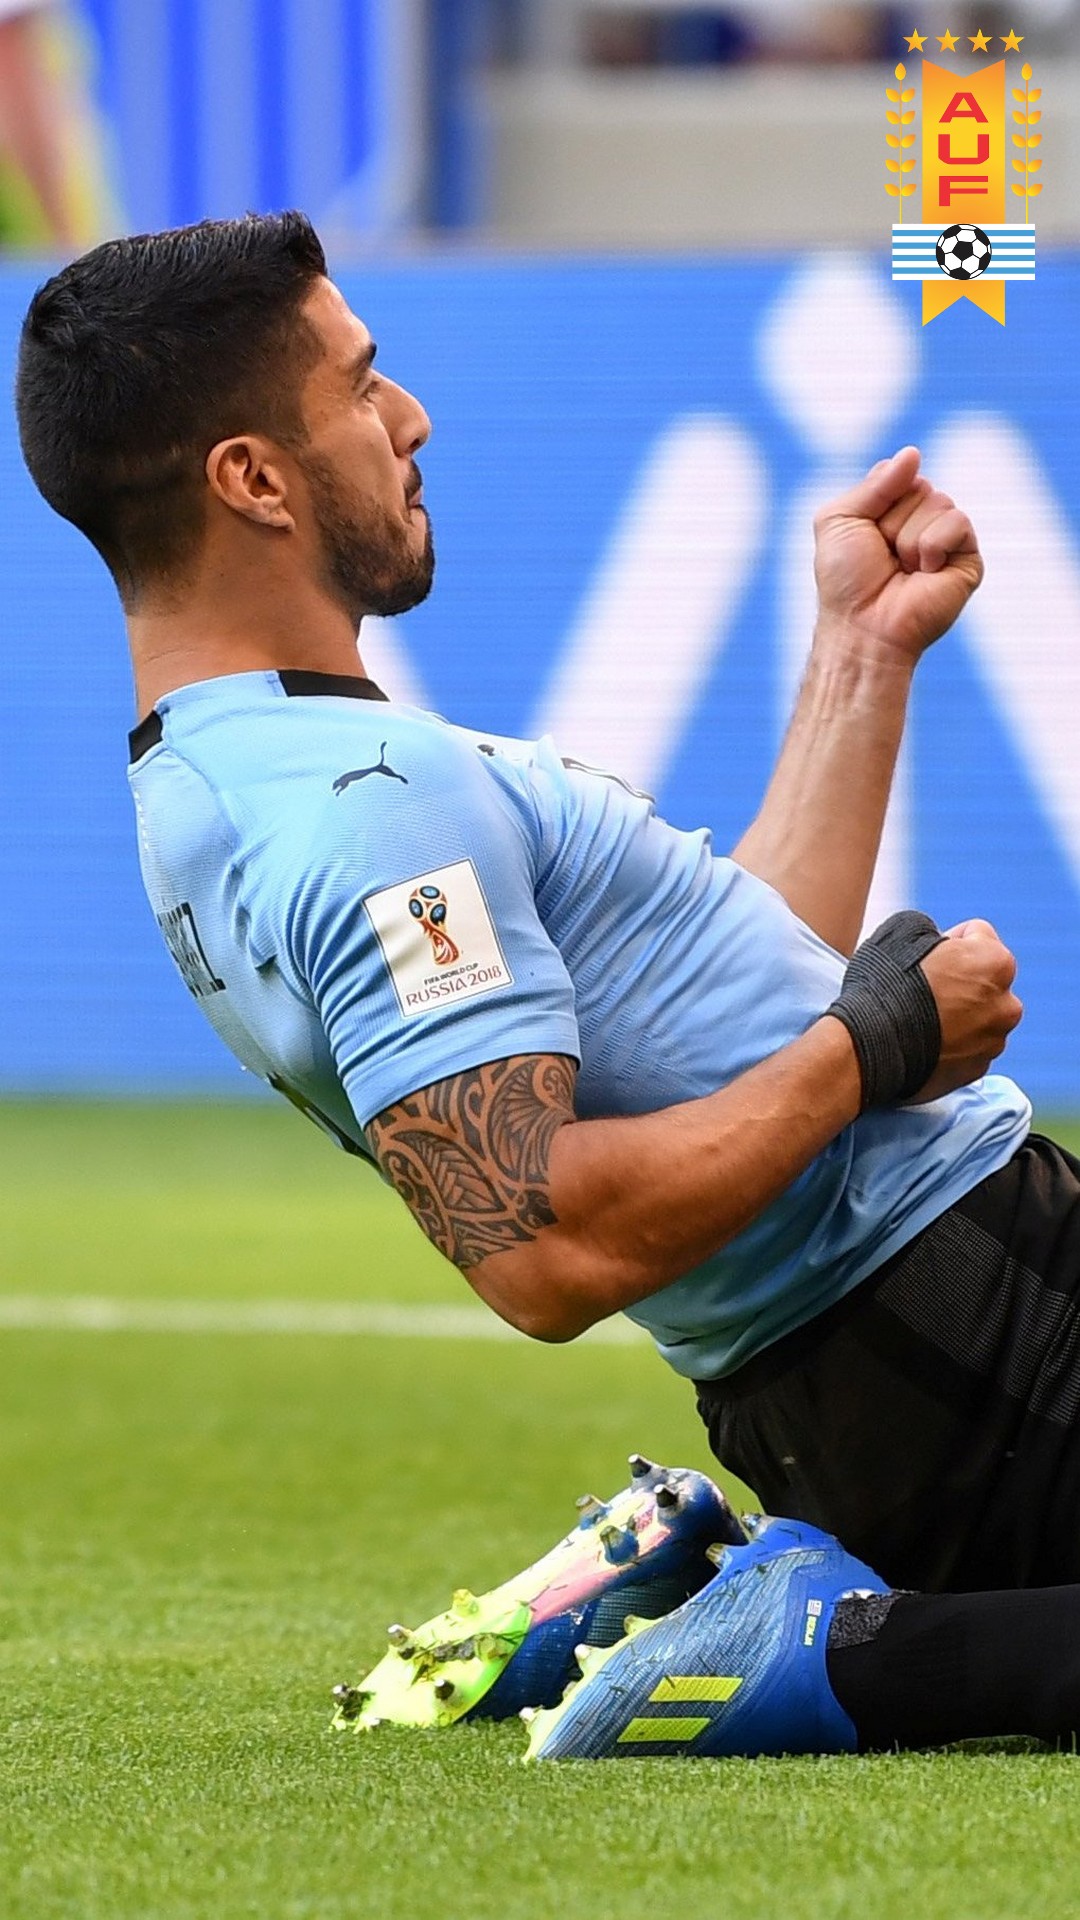 Mobile Wallpaper Luis Suarez Uruguay With Resolution 1080X1920 pixel. You can make this wallpaper for your Mac or Windows Desktop Background, iPhone, Android or Tablet and another Smartphone device for free